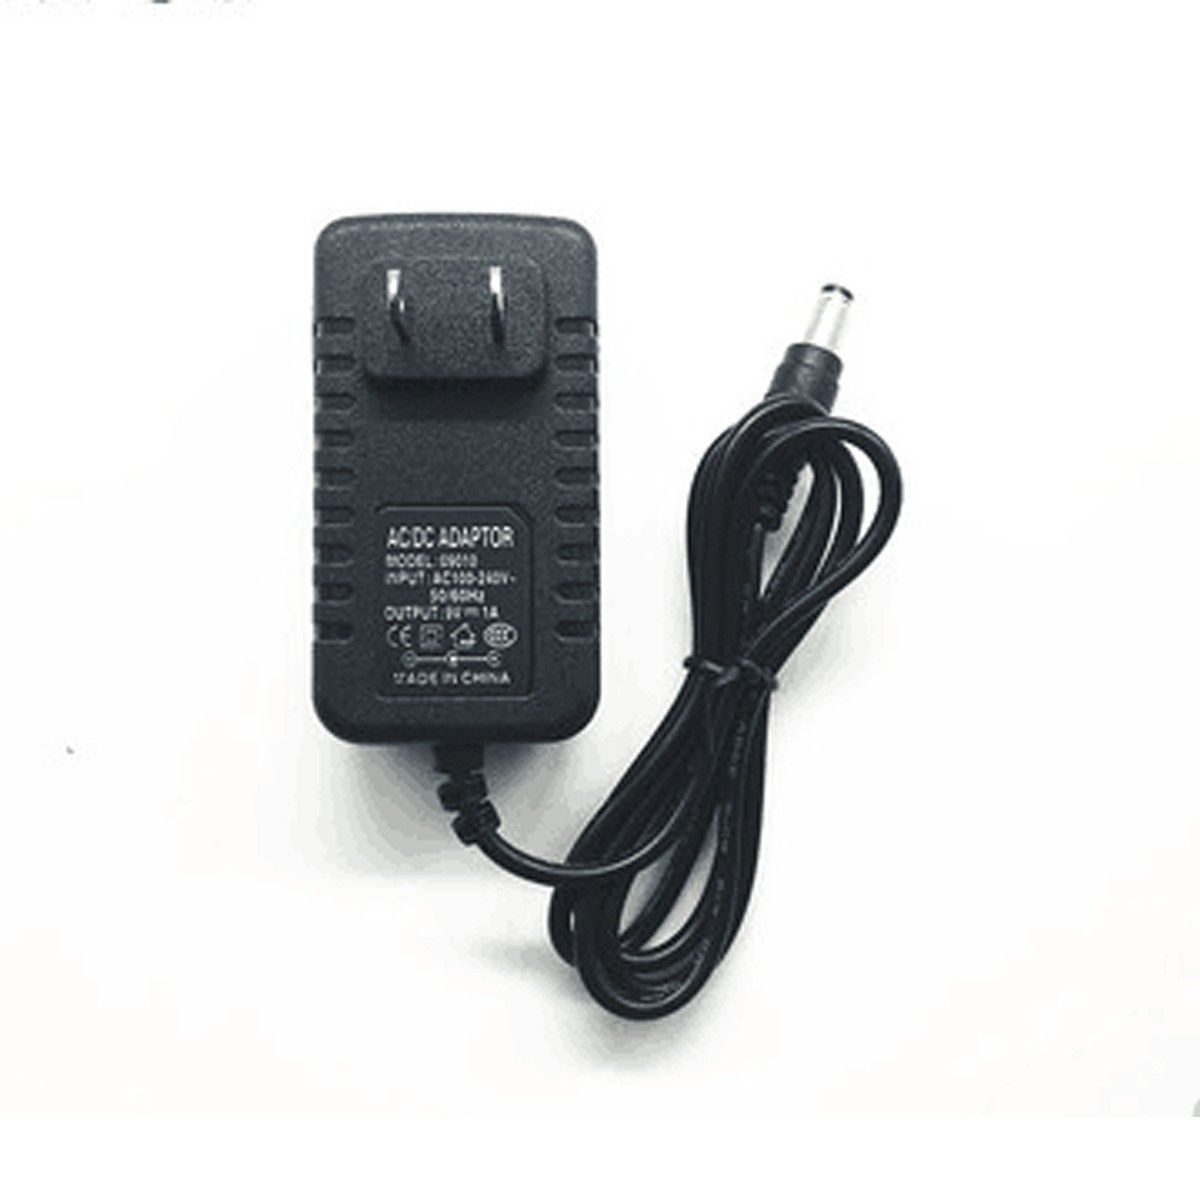 New compatible adapter for Honeywell 5828dm 5828 5828v 5V 1A 5.5 - Click Image to Close